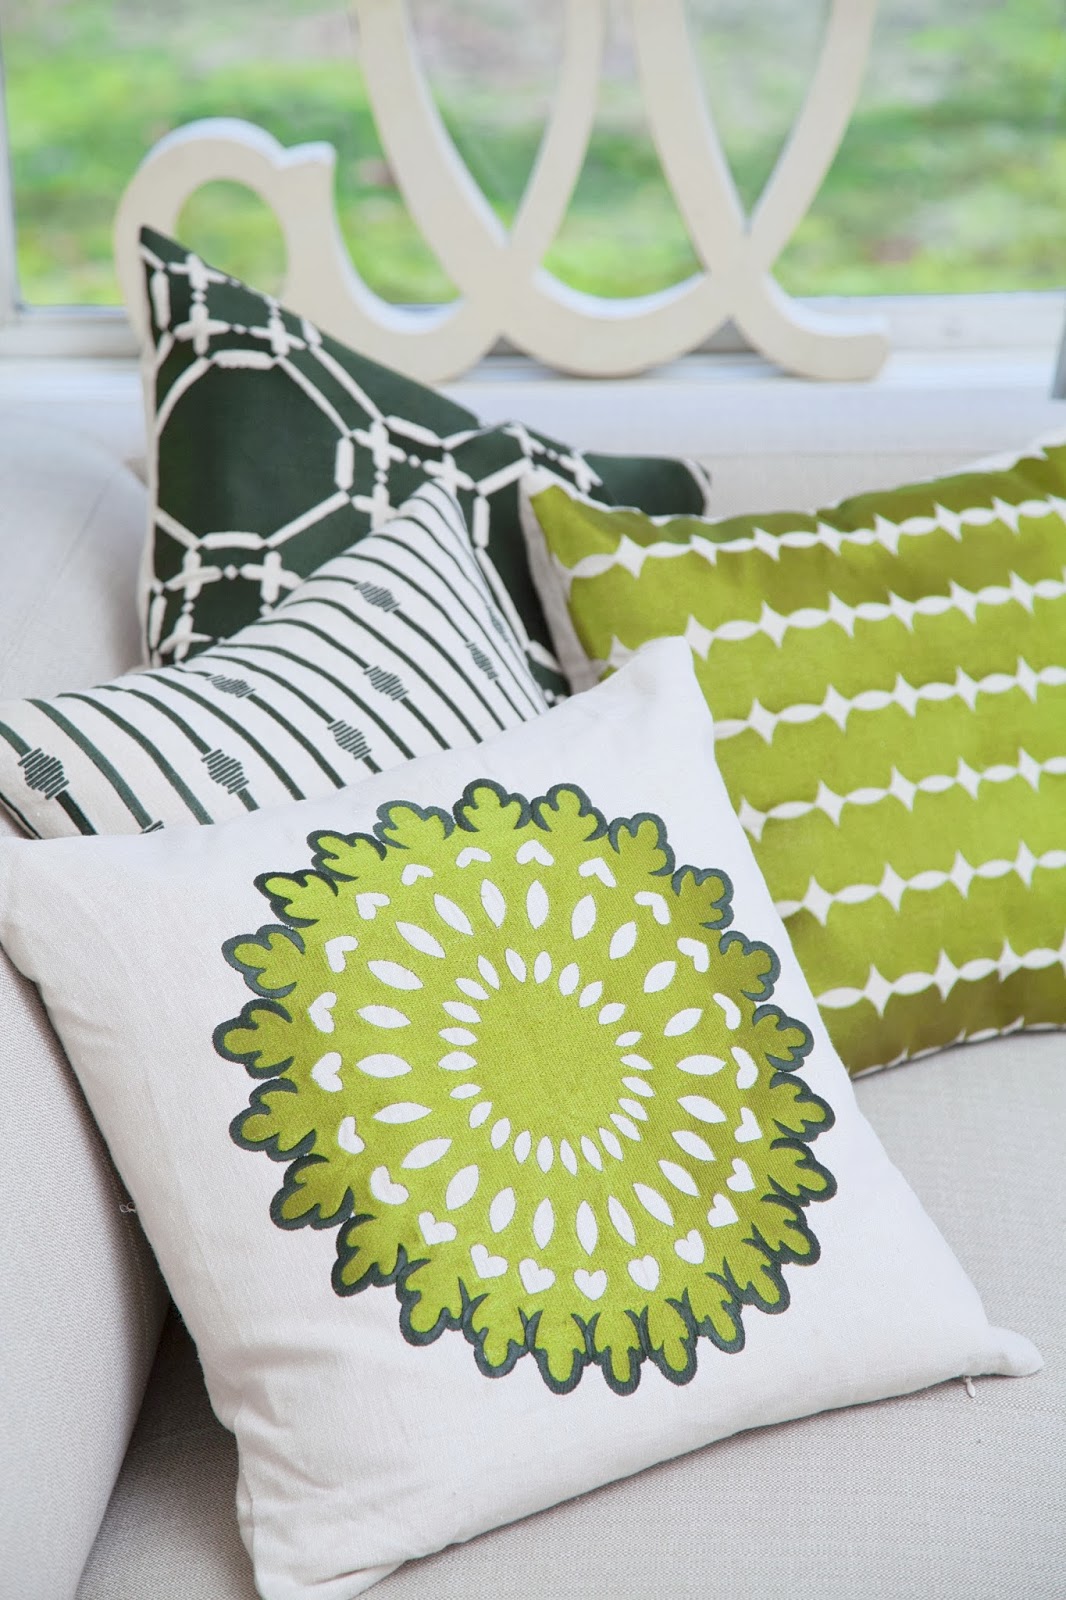 COCOCOZY 2014 Embroidered Pillow Collection in shades of green